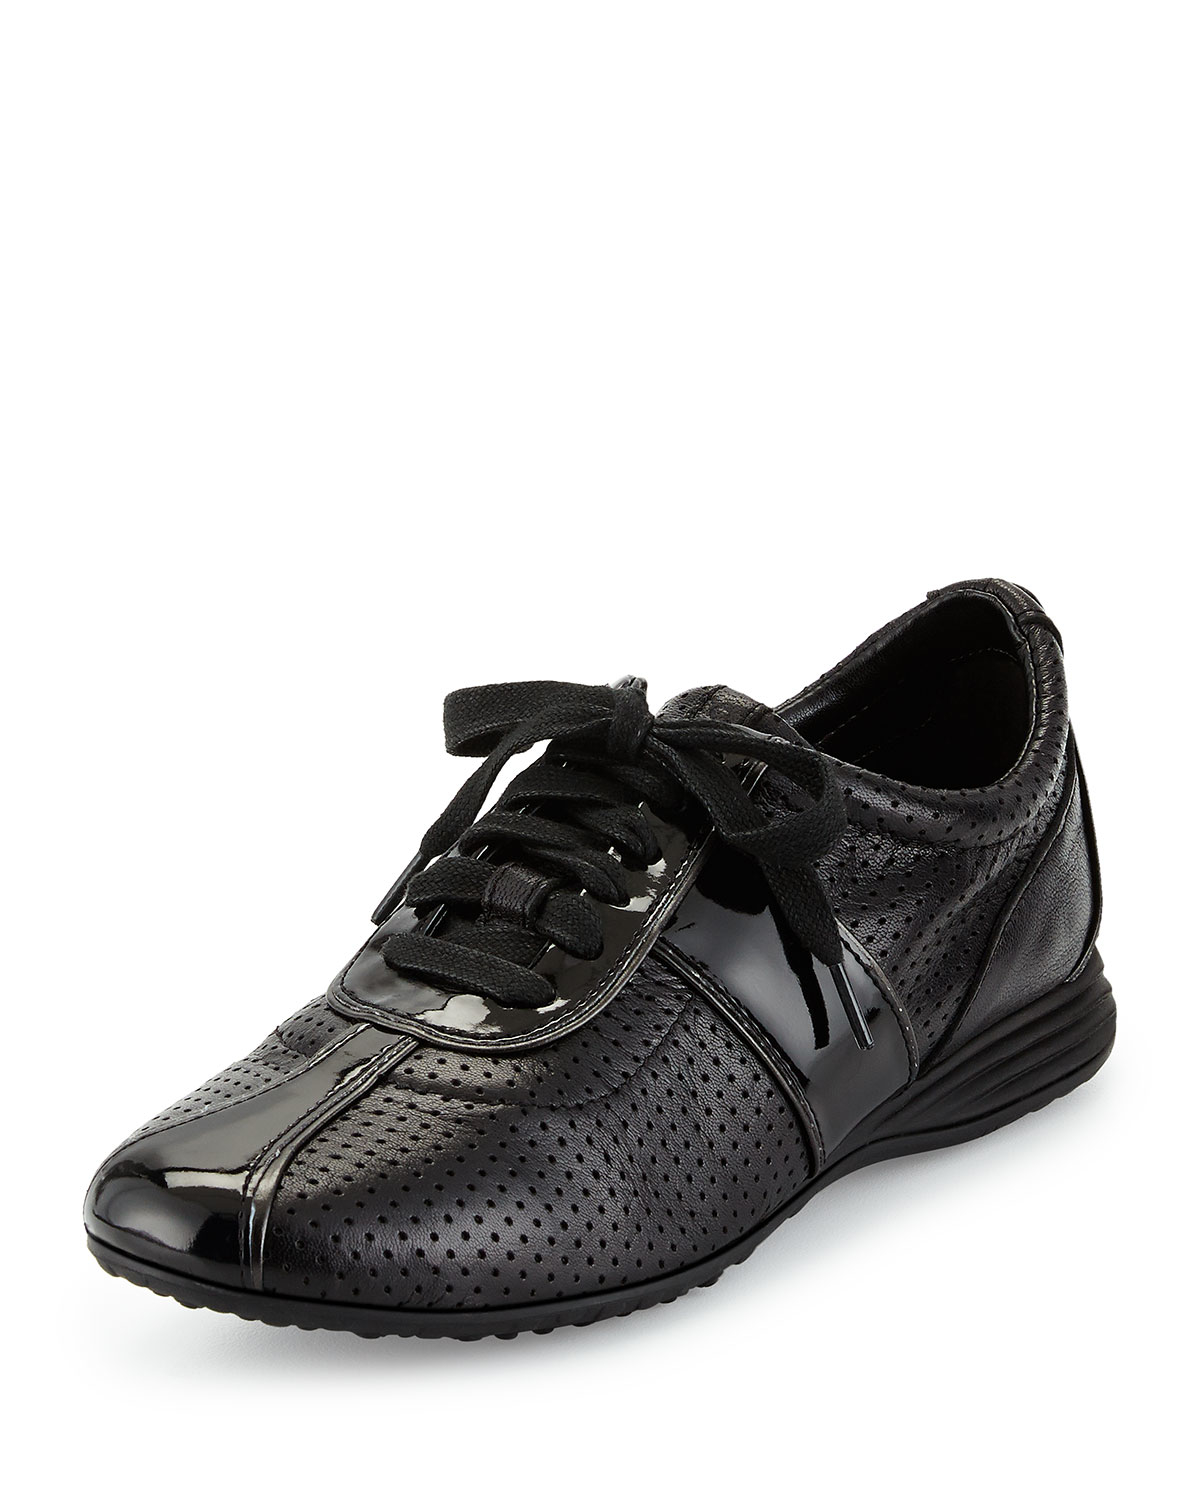 Cole haan Bria Perforated Leather Sneaker in Black - Save 50% | Lyst